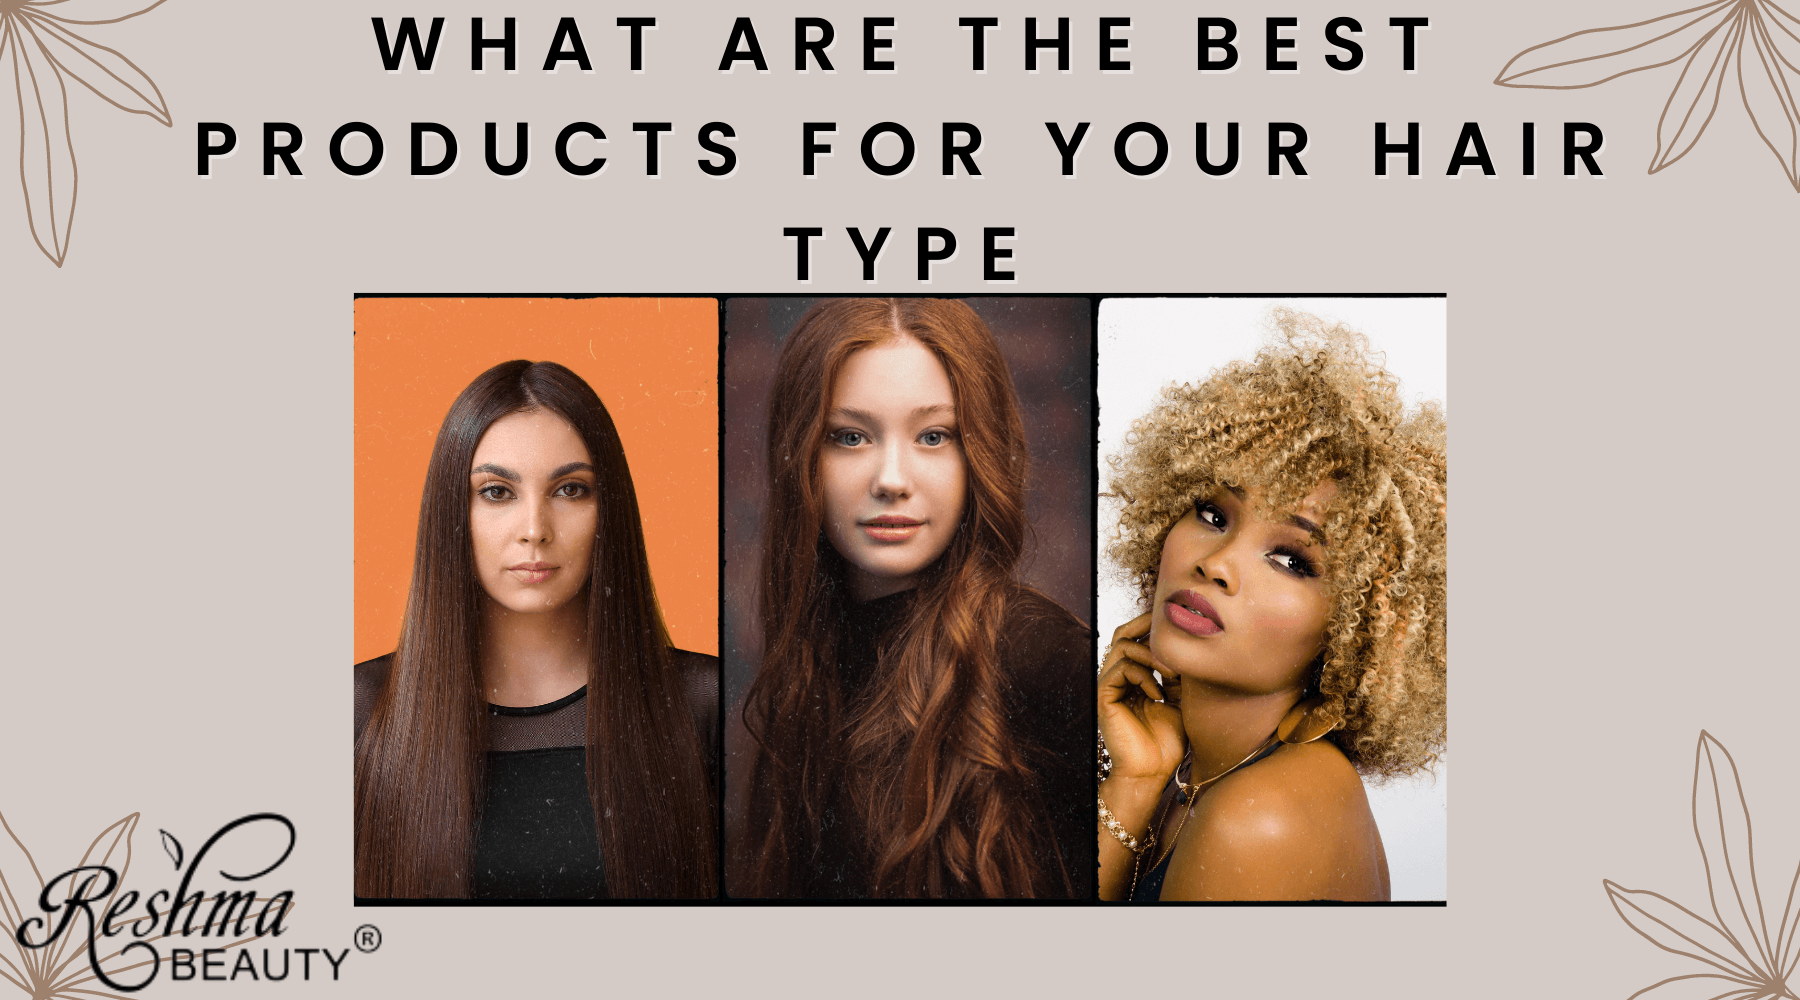 What are the best products for your hair type? – Reshma Beauty®